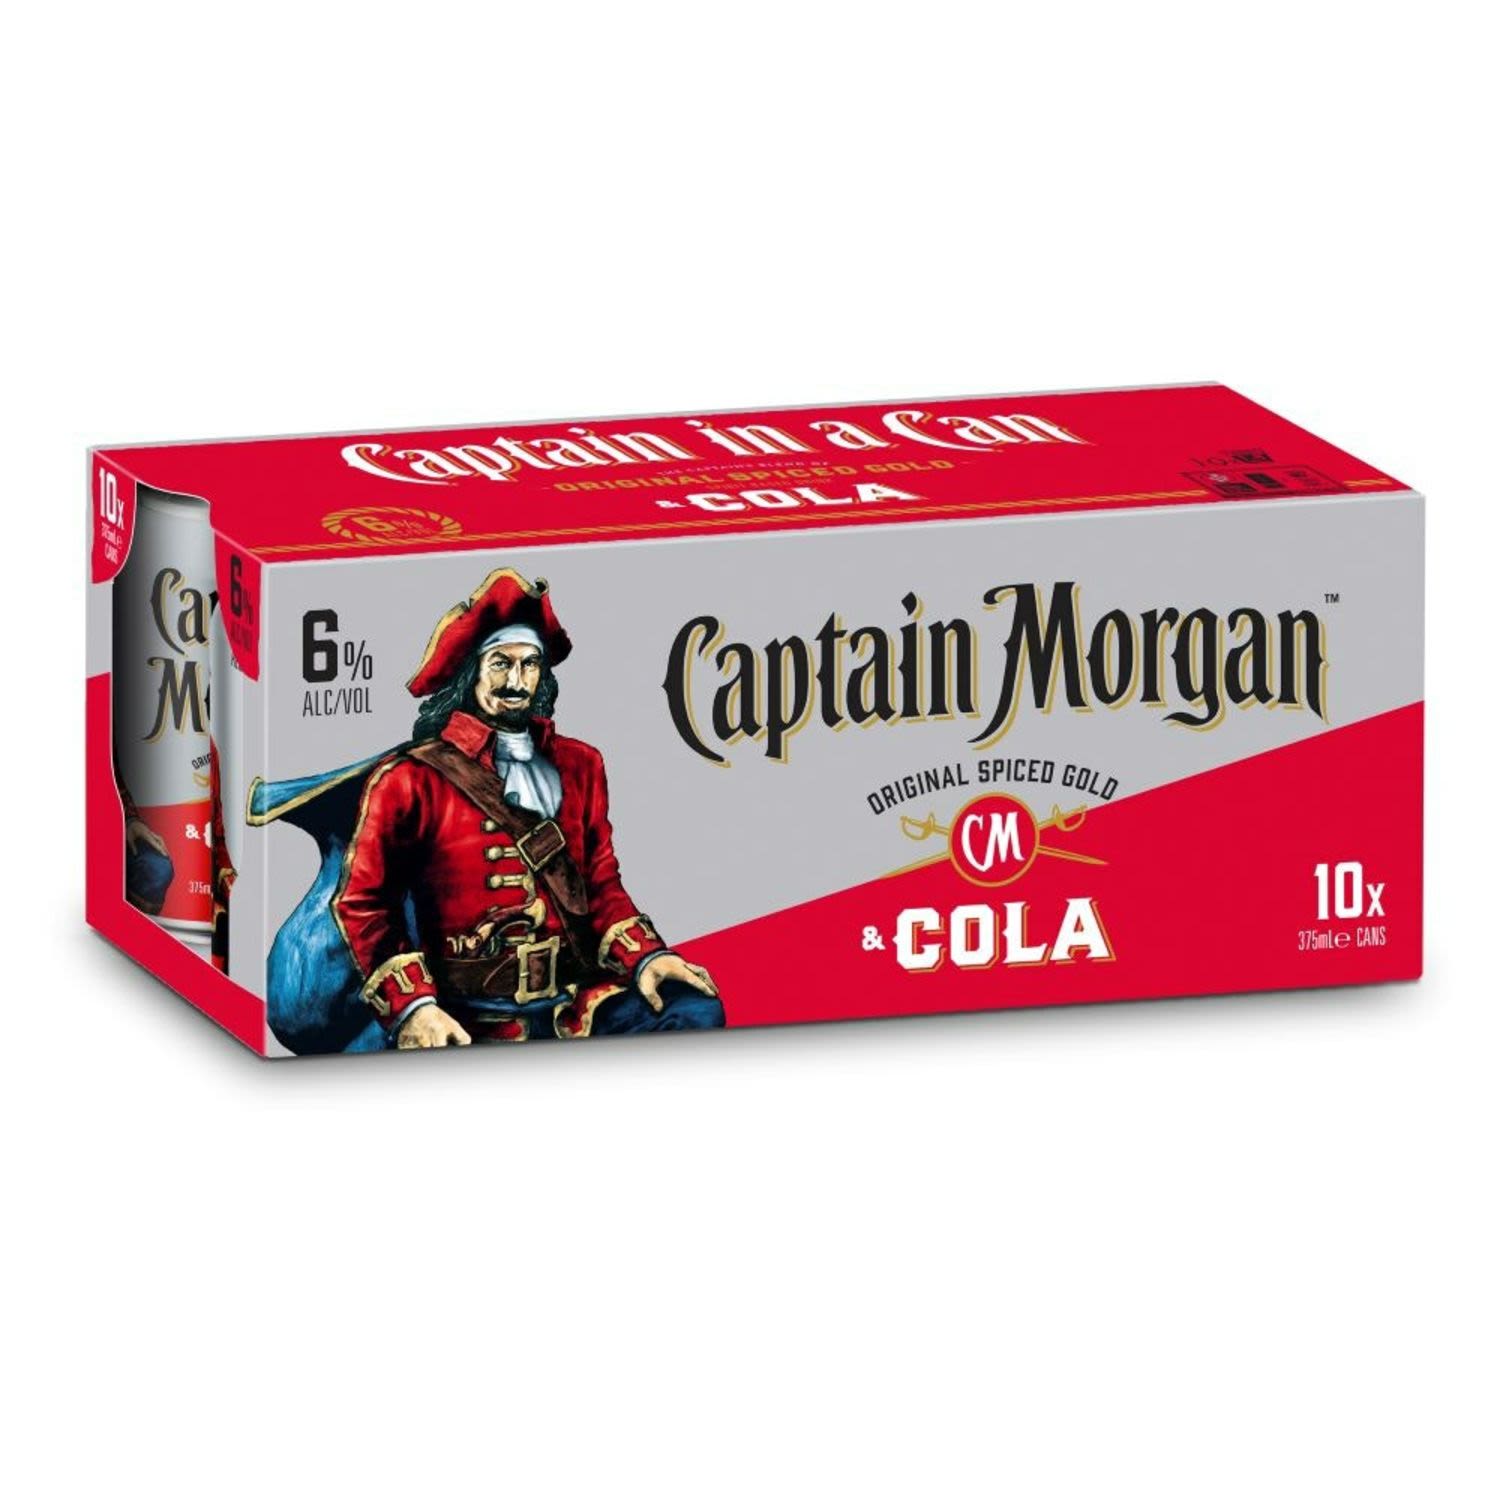 Captain Morgan Original Spiced Gold & Cola 6% Can 375mL 10 Pack